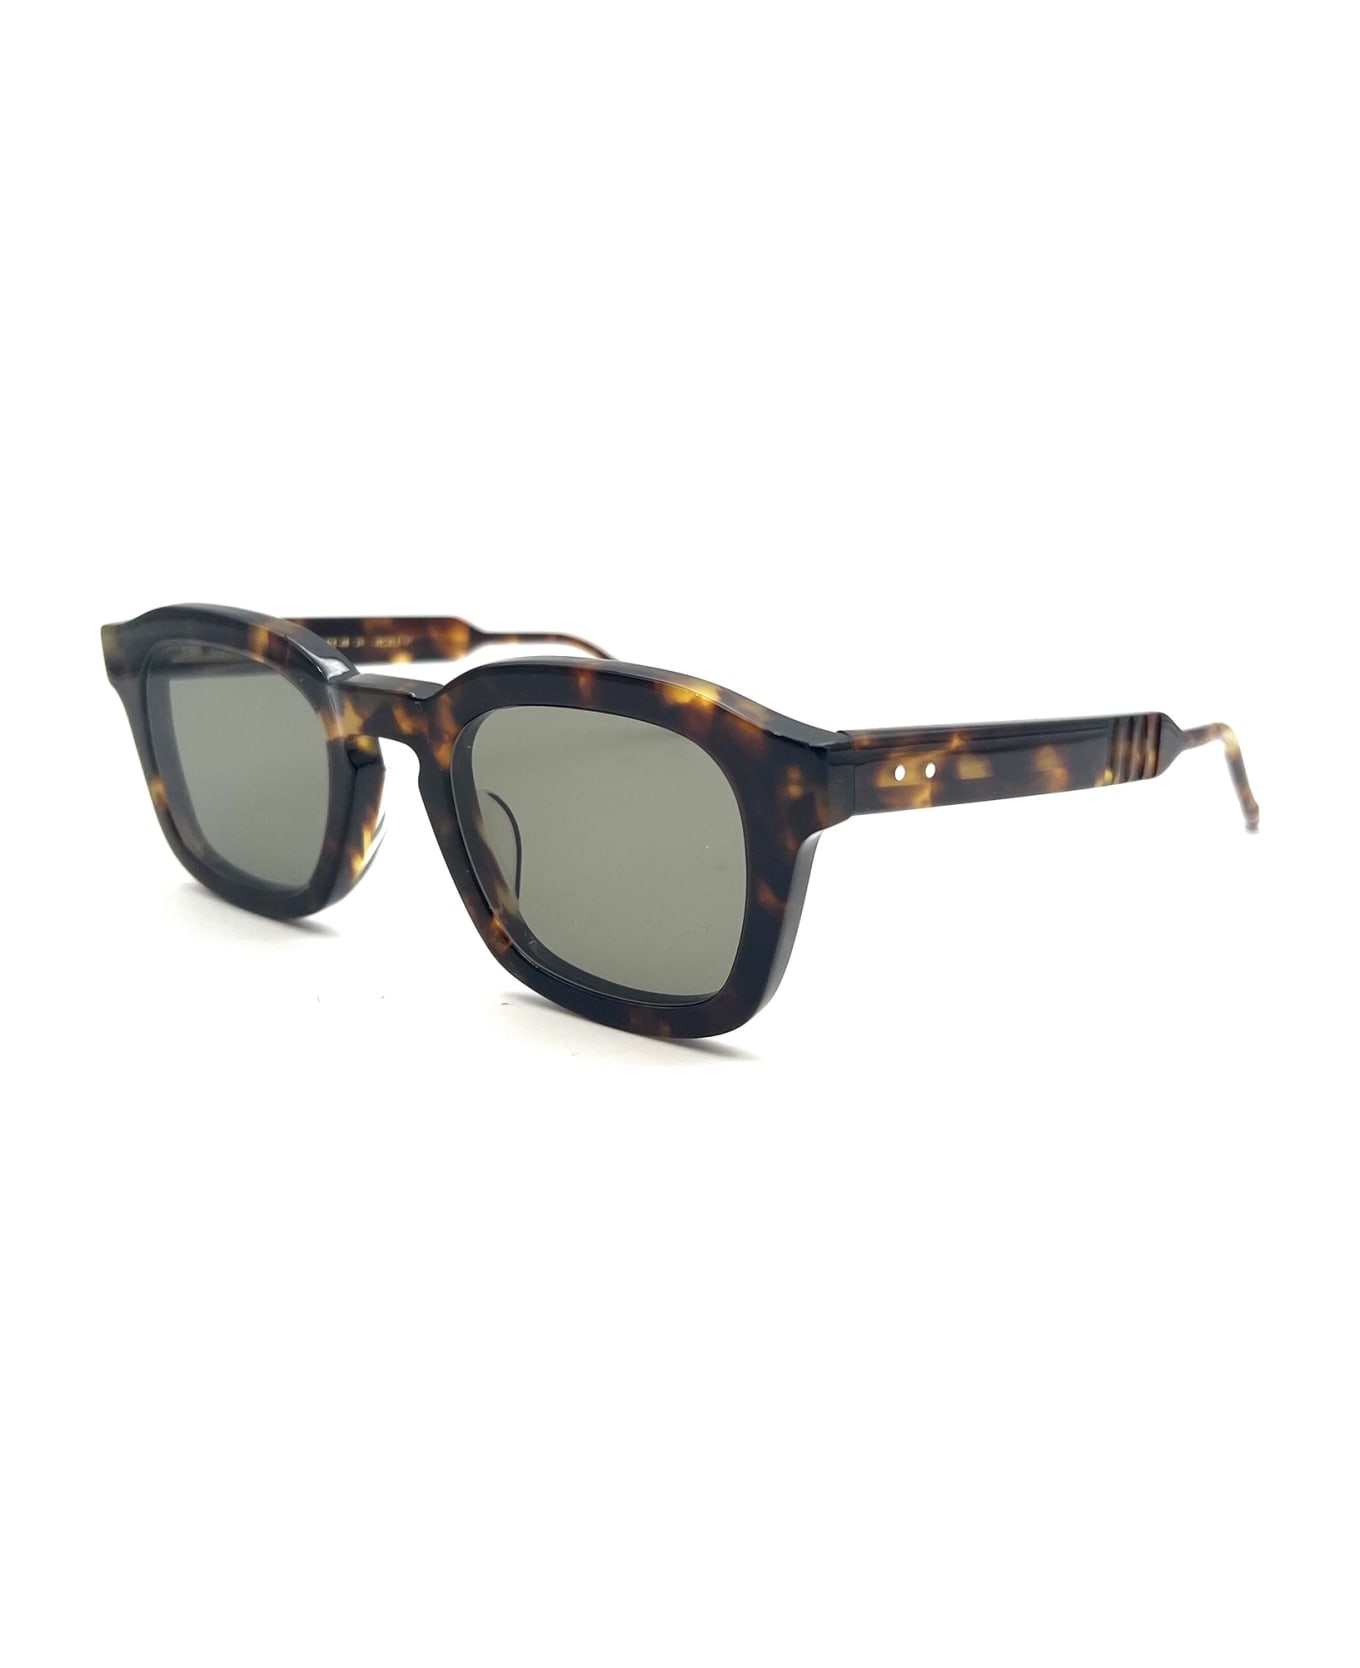 Thom Browne UES412A/G0002 Sunglasses - Med Brown サングラス